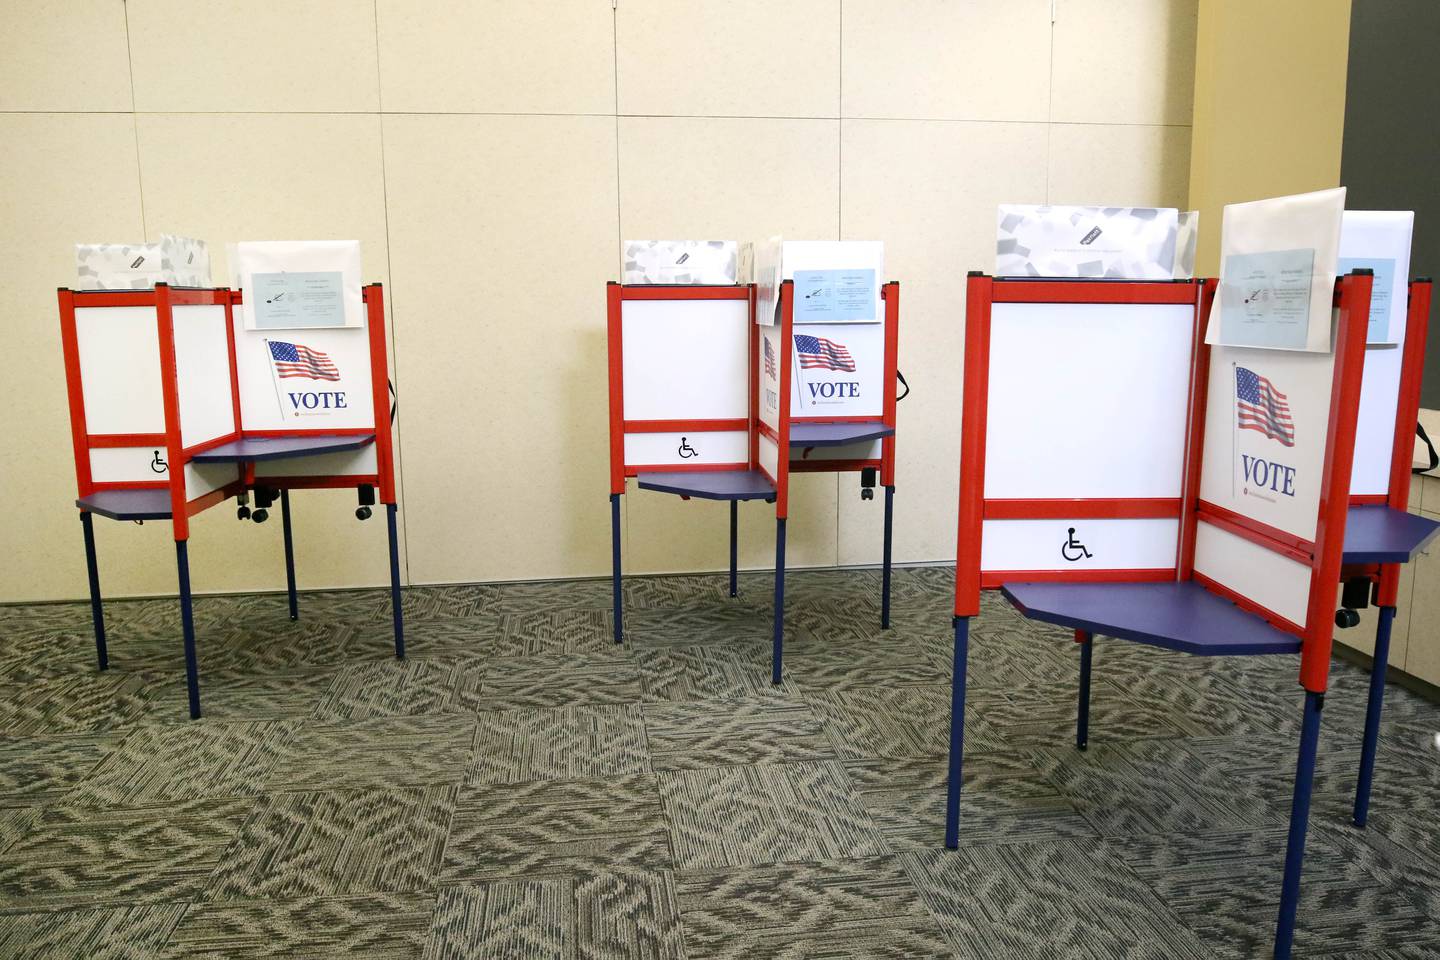 New voting booths are ready on the first day of early voting Thursday, May 19, 2022, at the polling place in the DeKalb County Legislative Center in Sycamore. Any registered voter in DeKalb County may choose to vote early, in person or through the mail, ahead of the June 28 primary election.